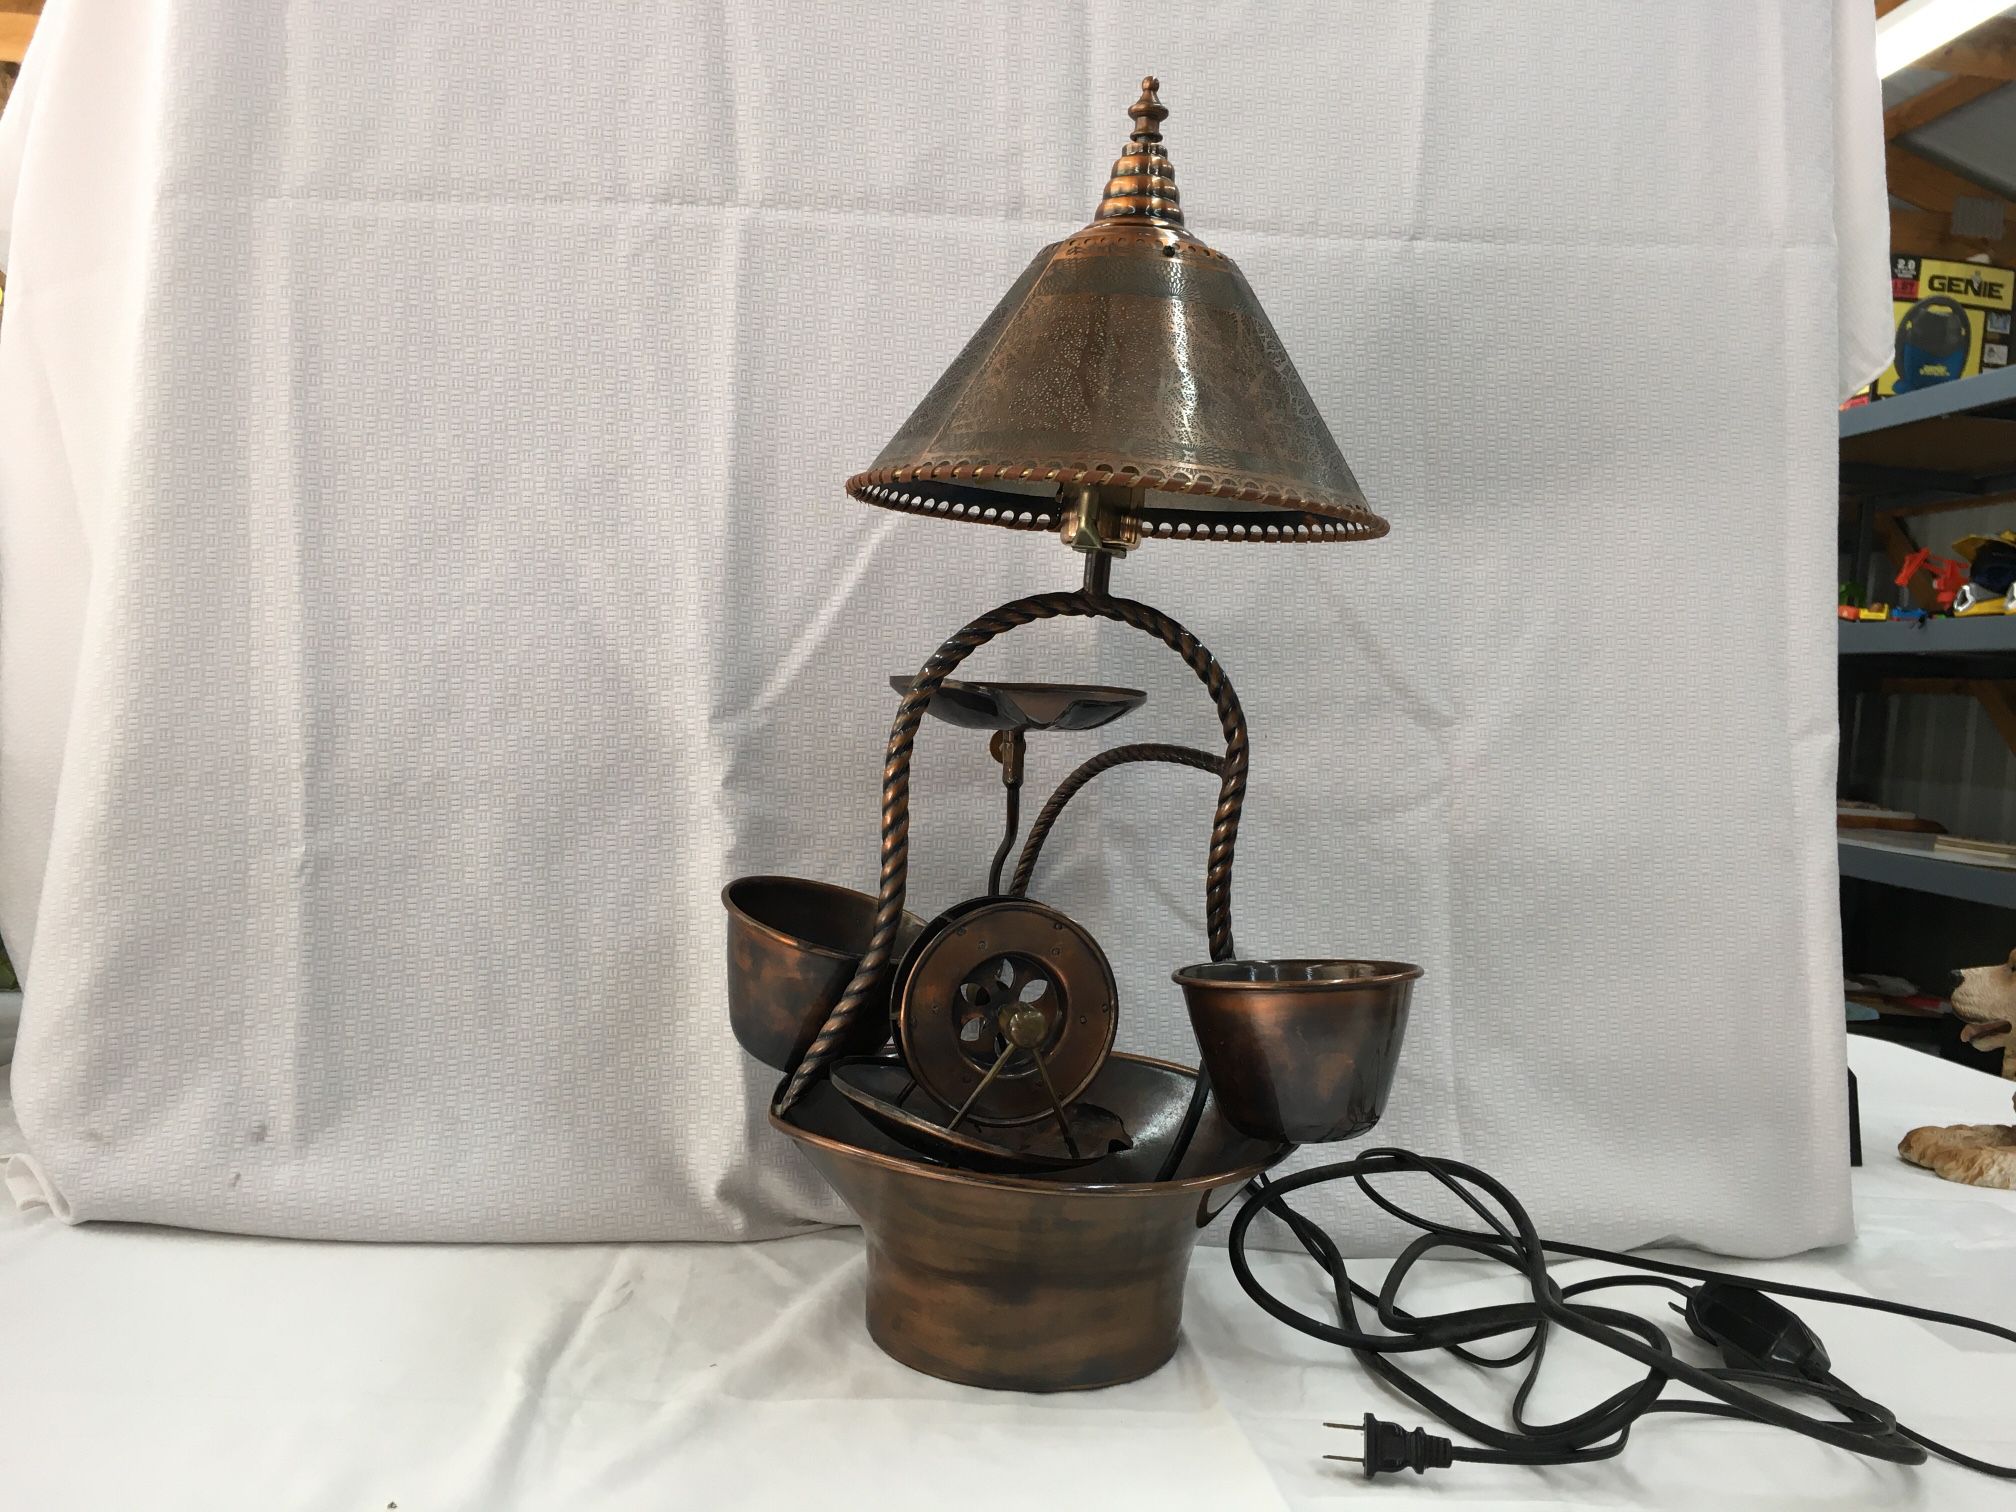 Antique Copper Lamp And Water Feature